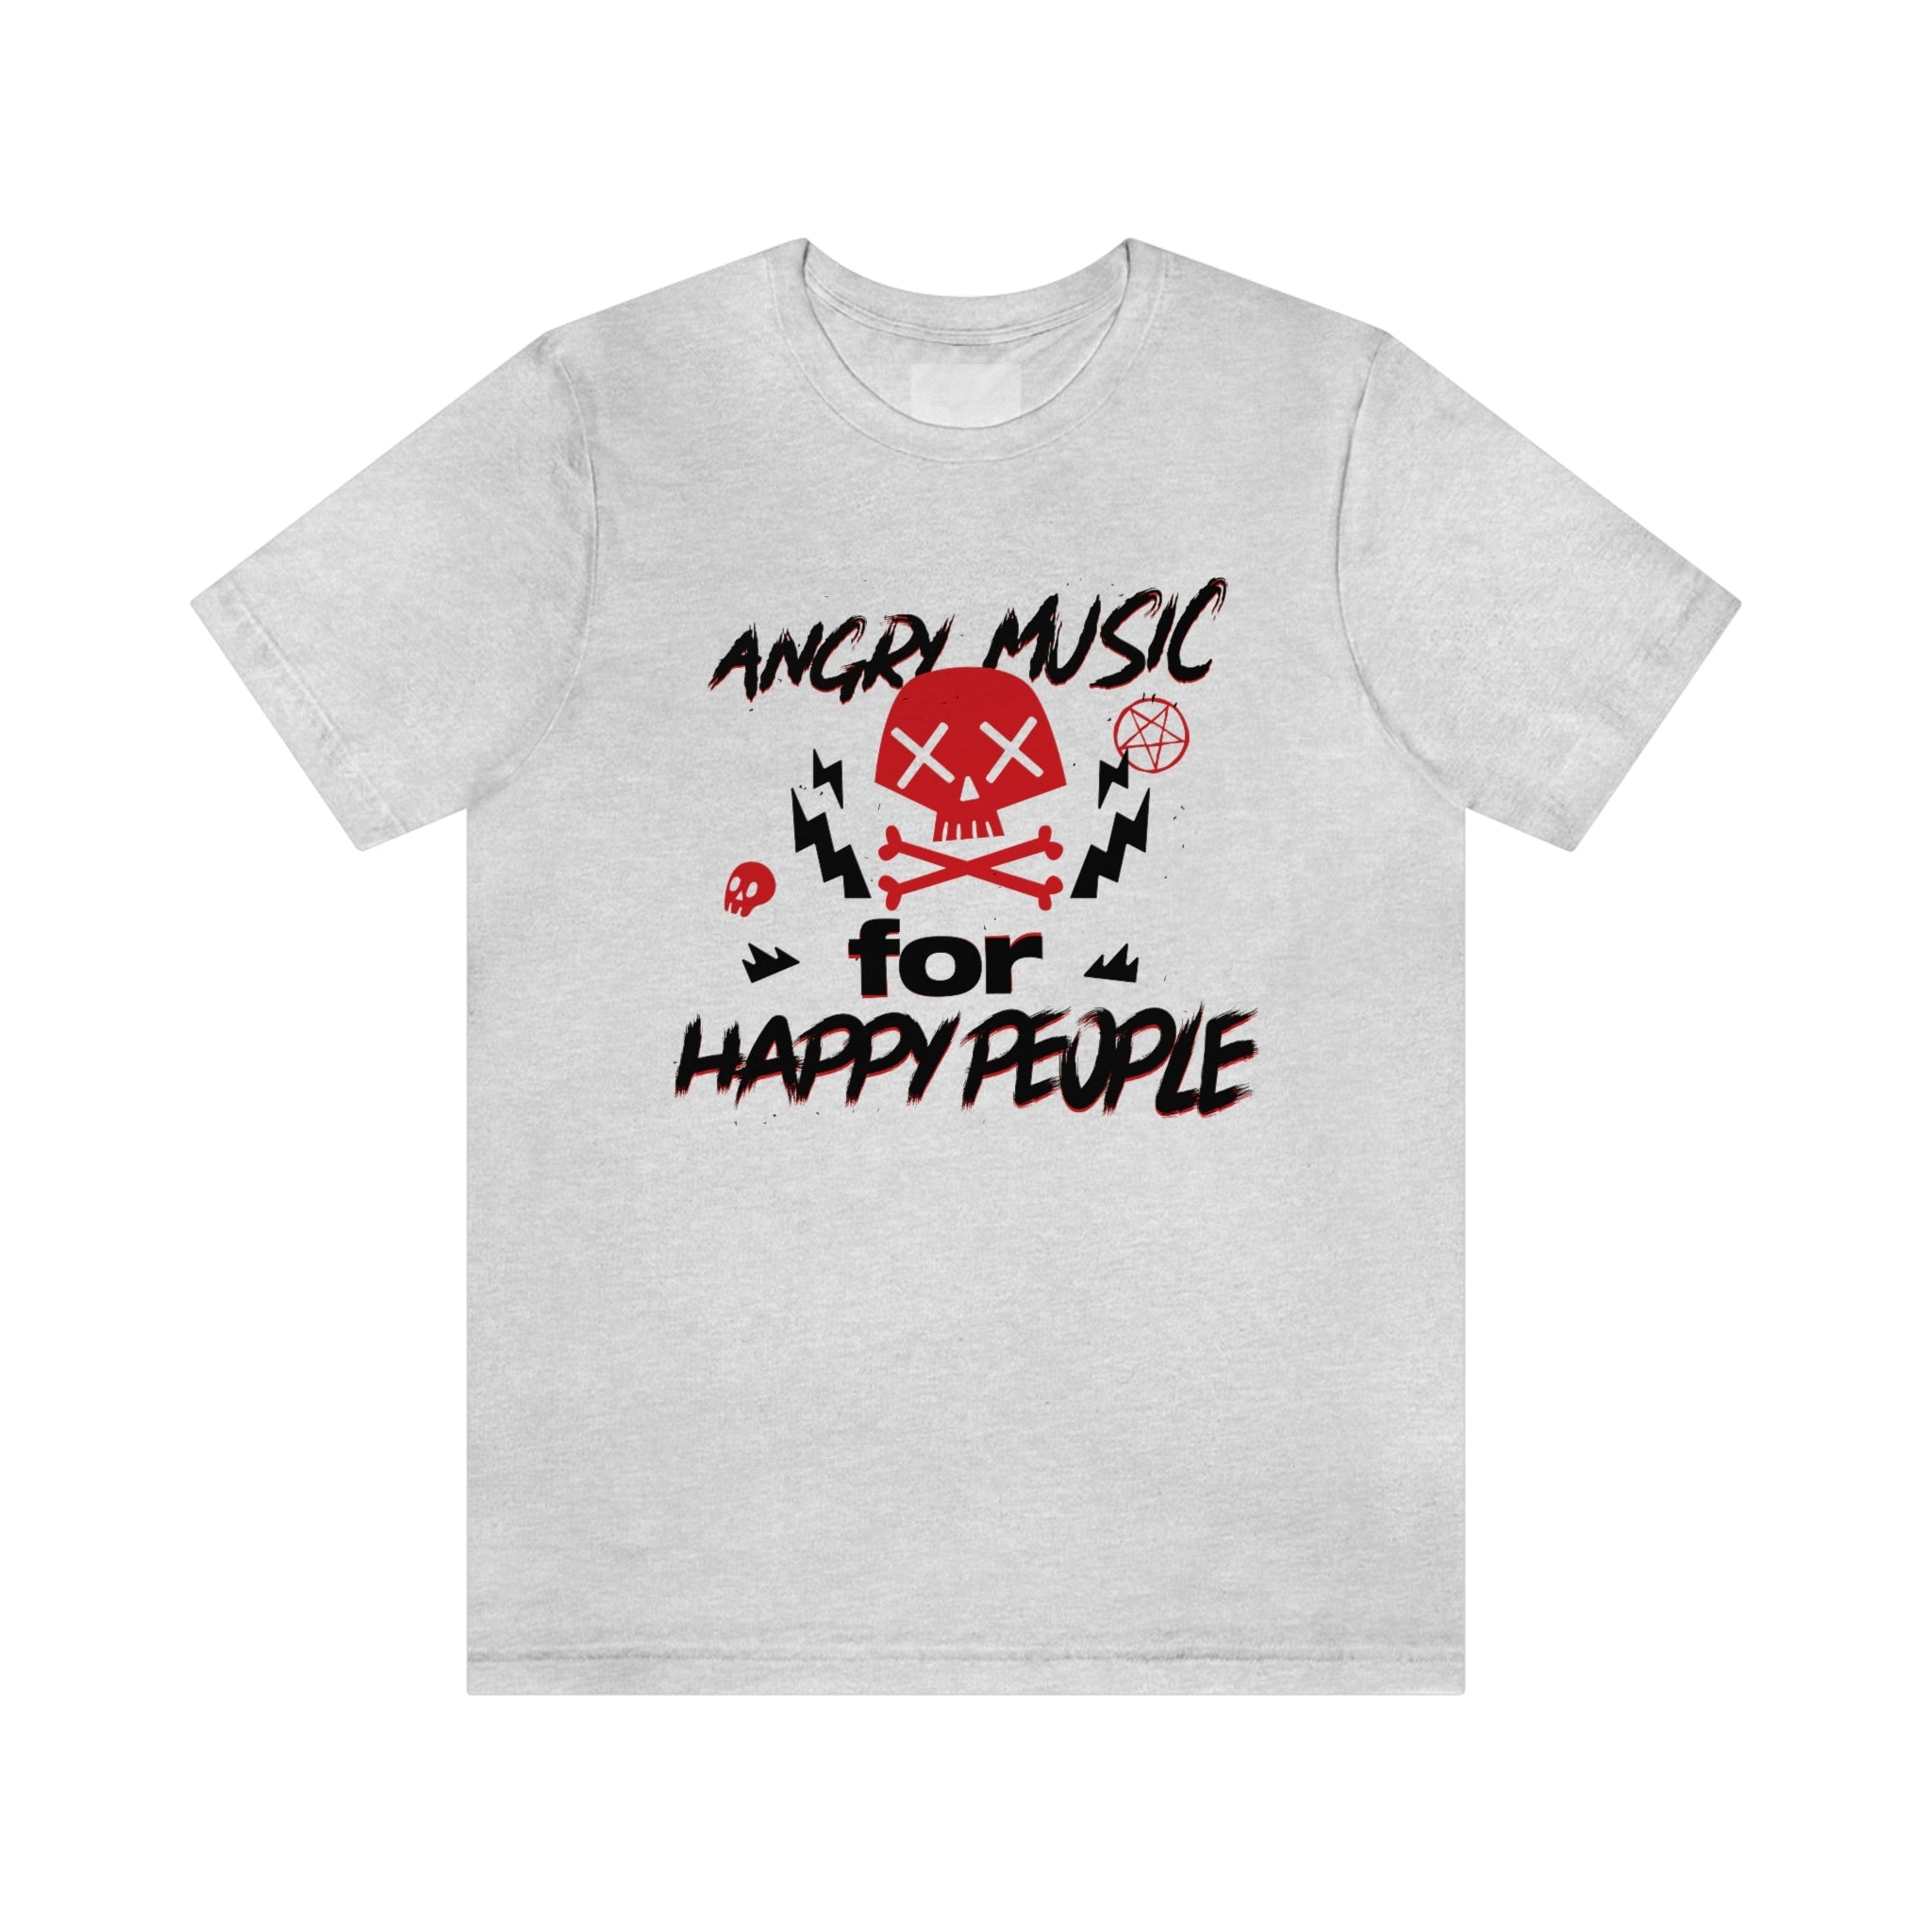 Angry Music for Happy People : Unisex 100% Premium Cotton T-Shirt by Bella+Canvas